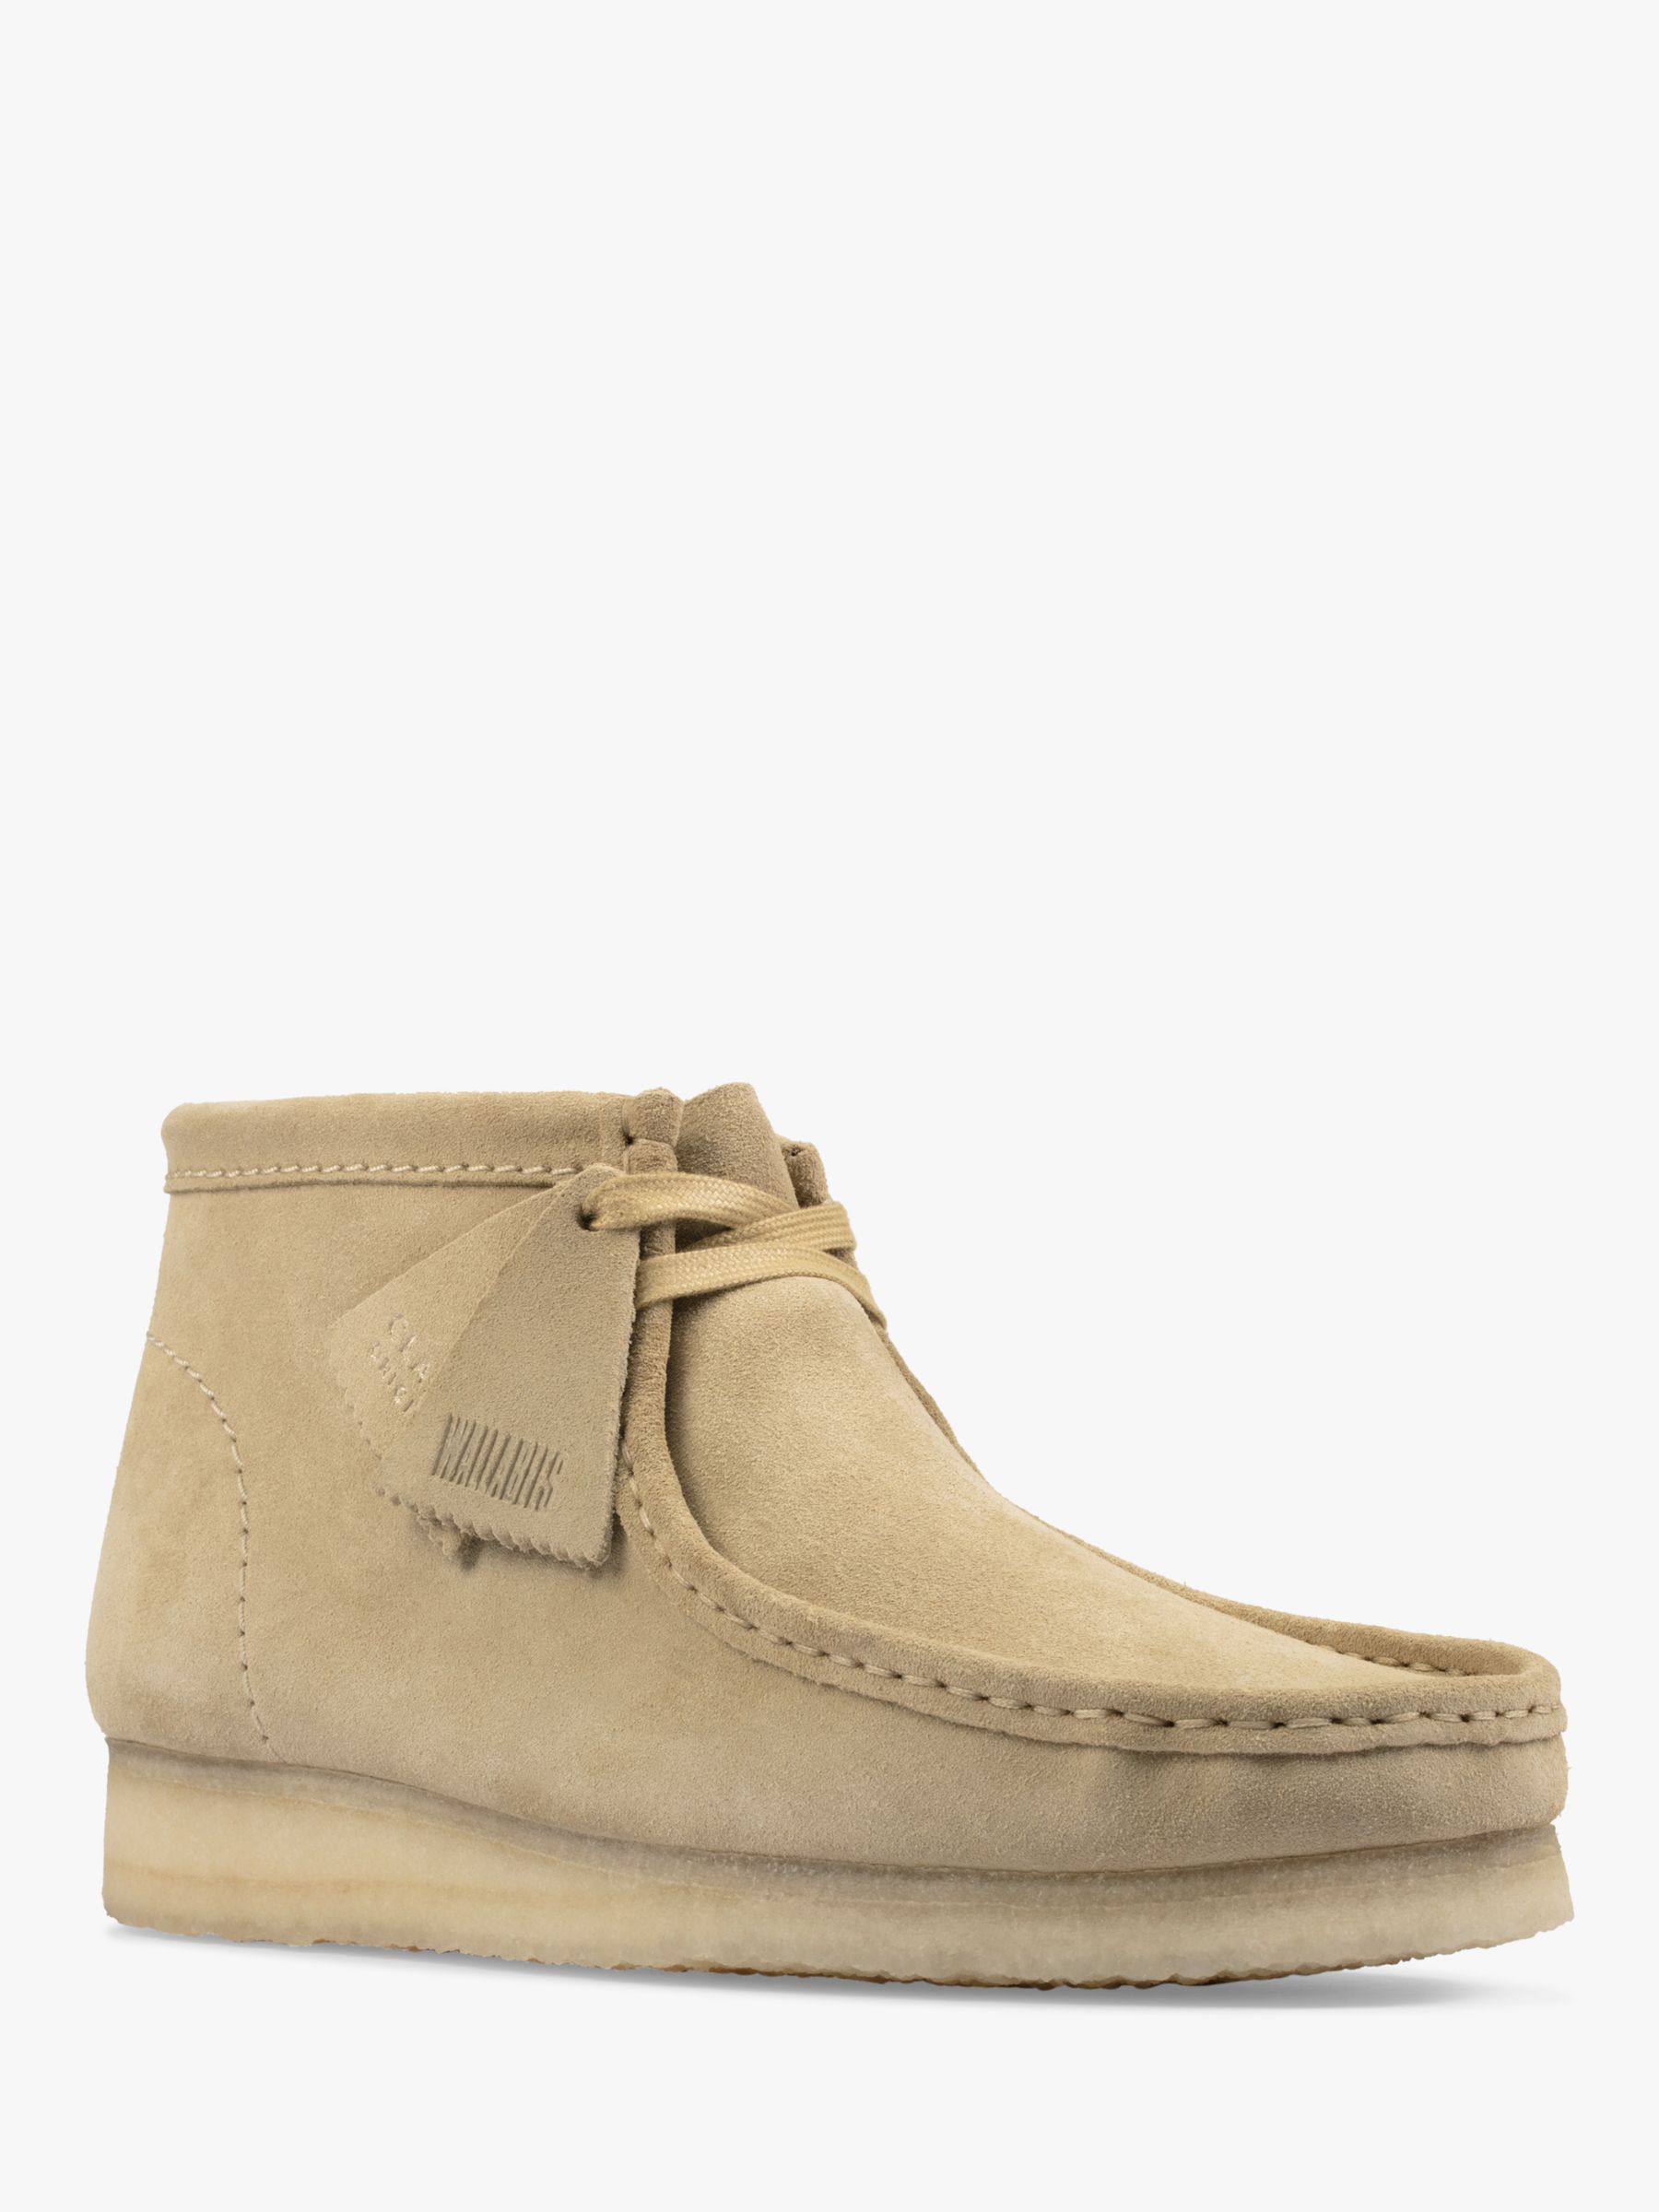 Clarks Originals Wallabee Suede Boots, Maple at John Lewis & Partners